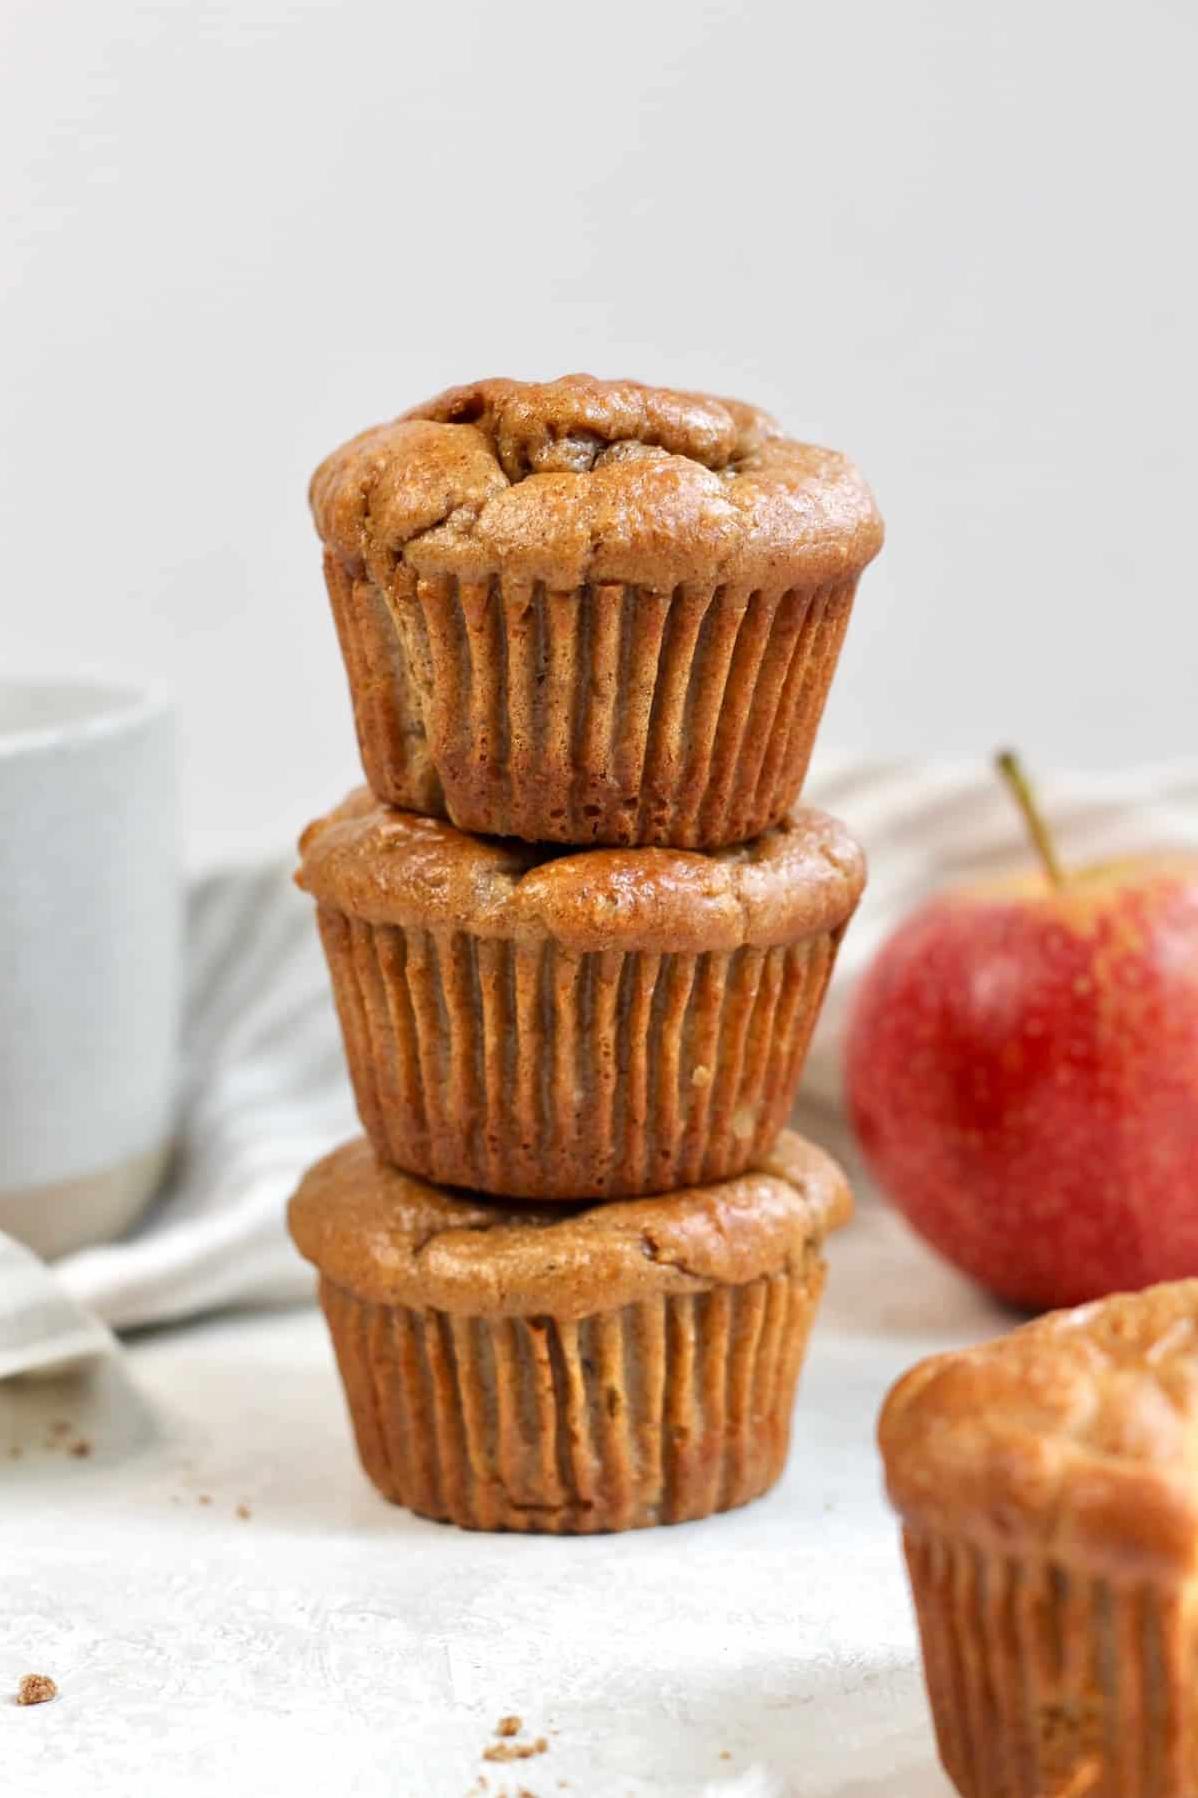  Who says gluten-free has to be boring? These muffins say otherwise!